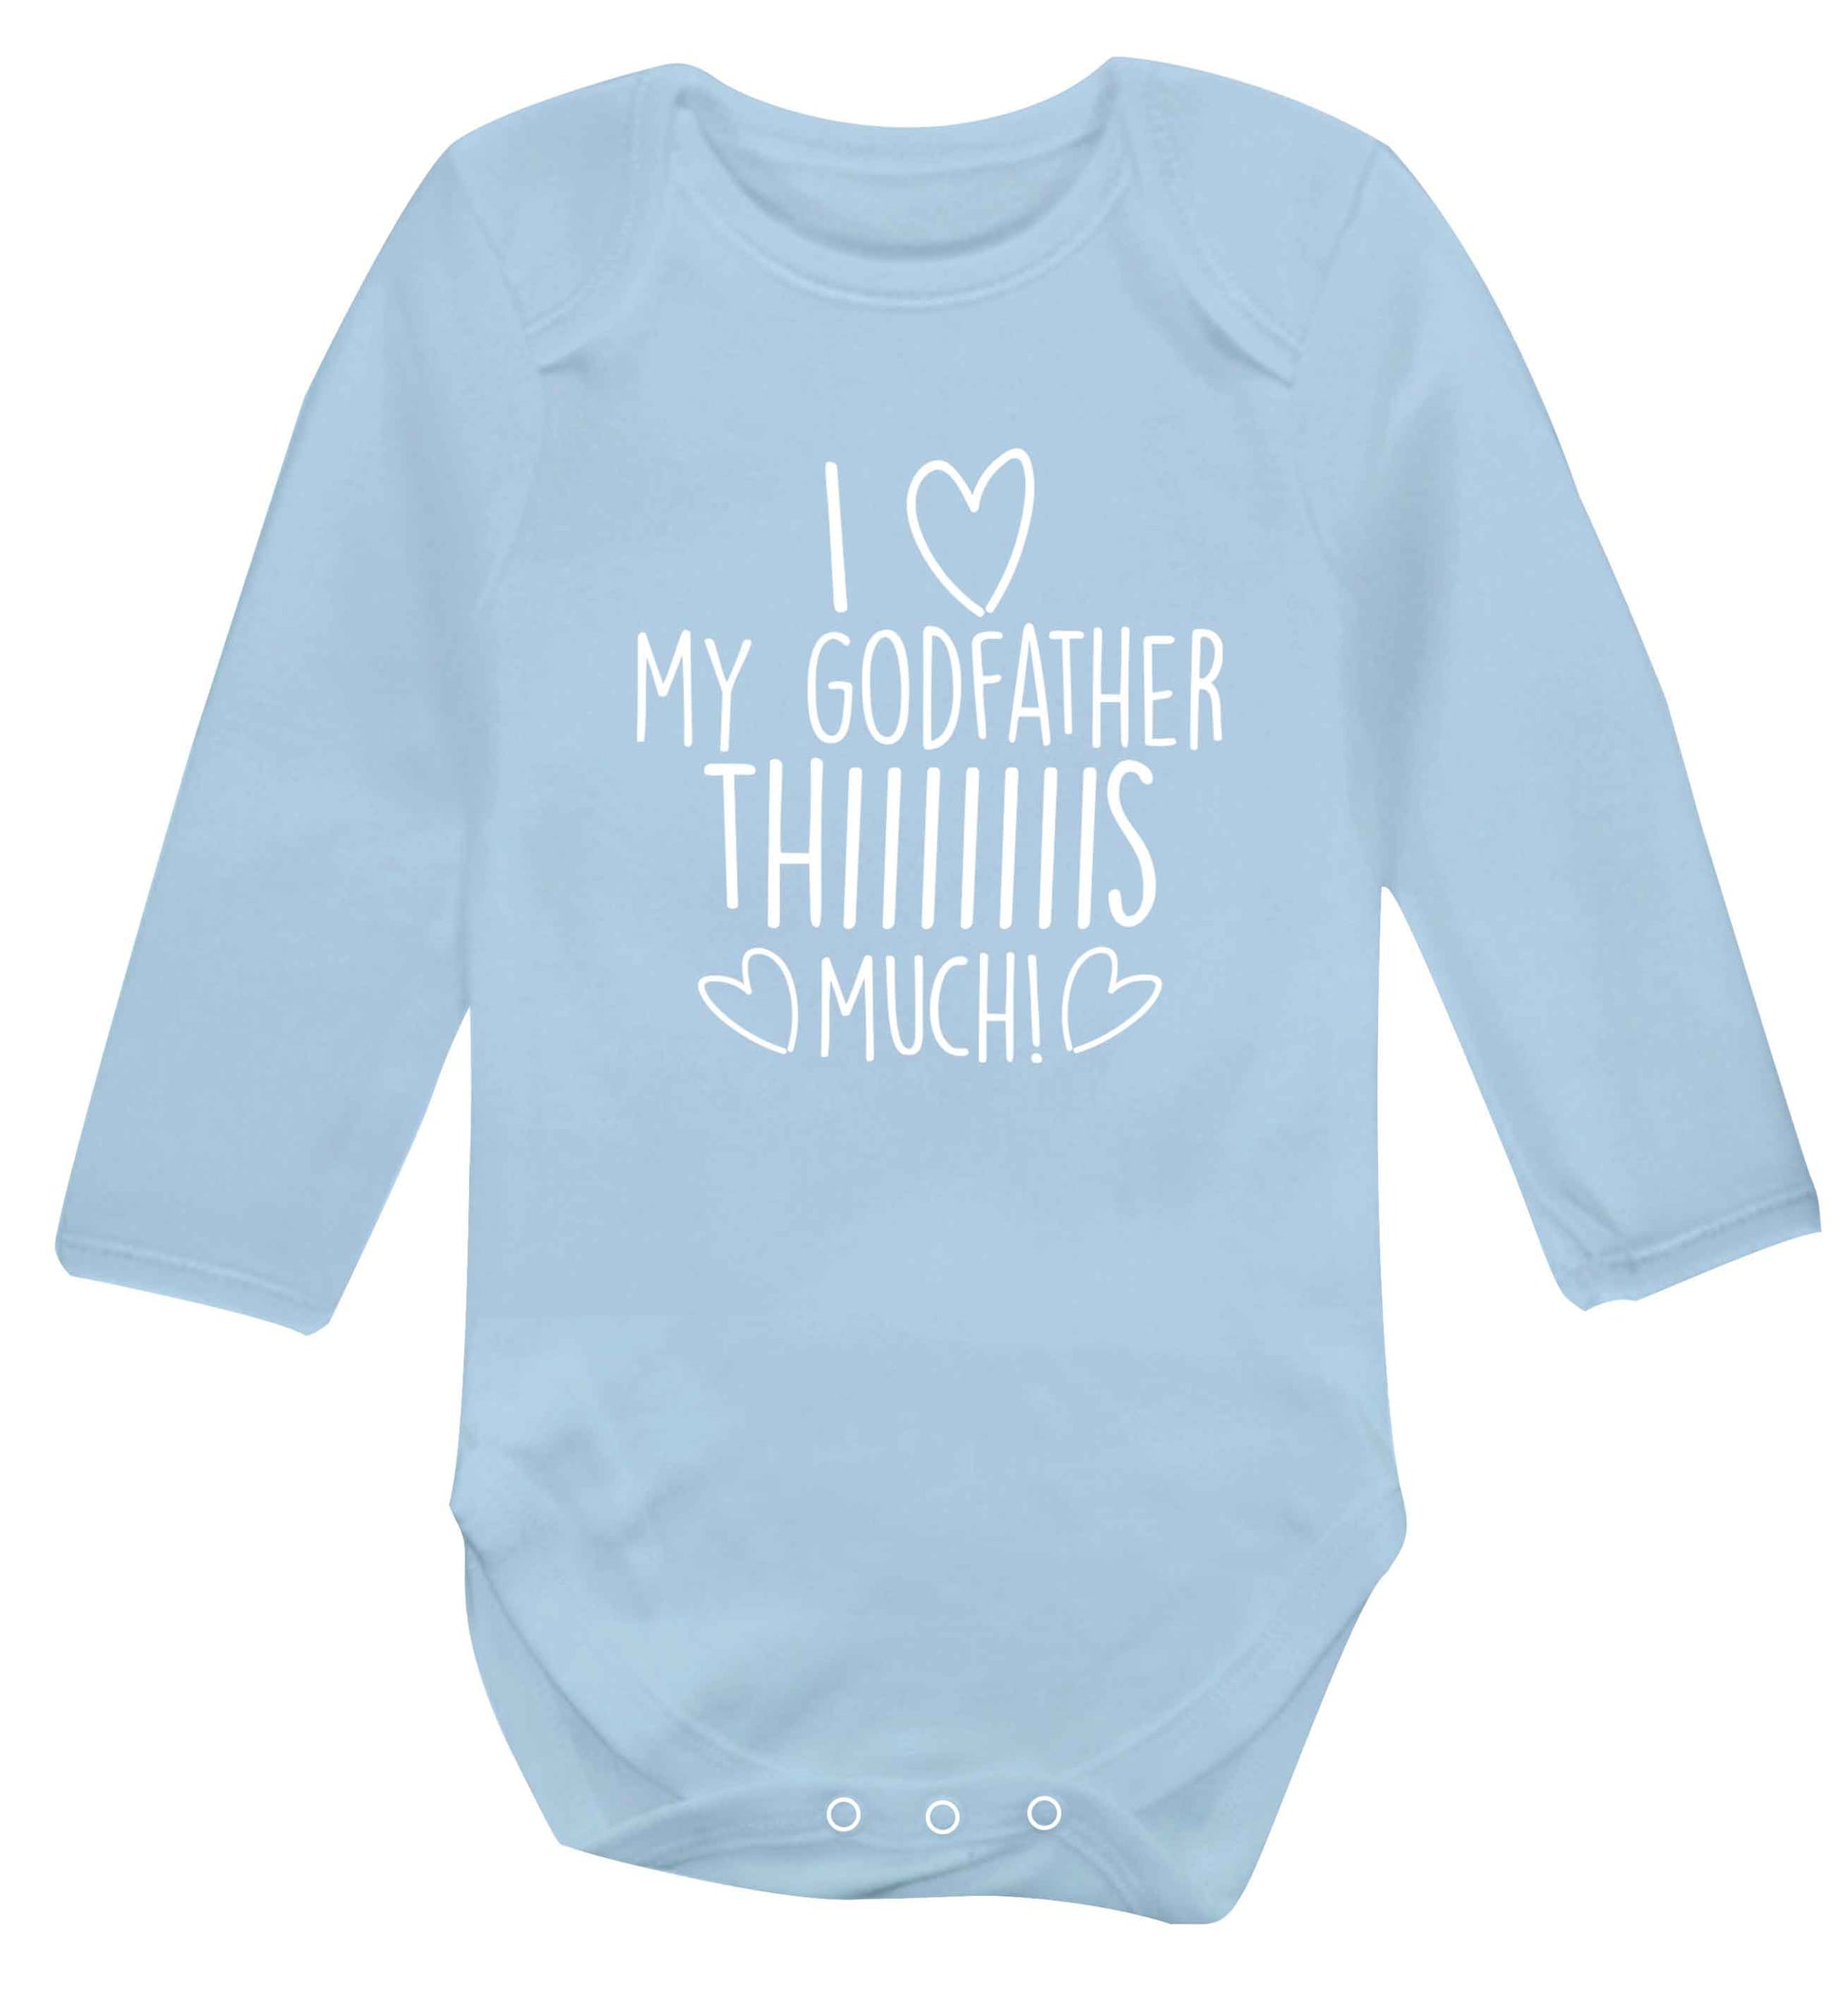 I love my Godfather this much baby vest long sleeved pale blue 6-12 months